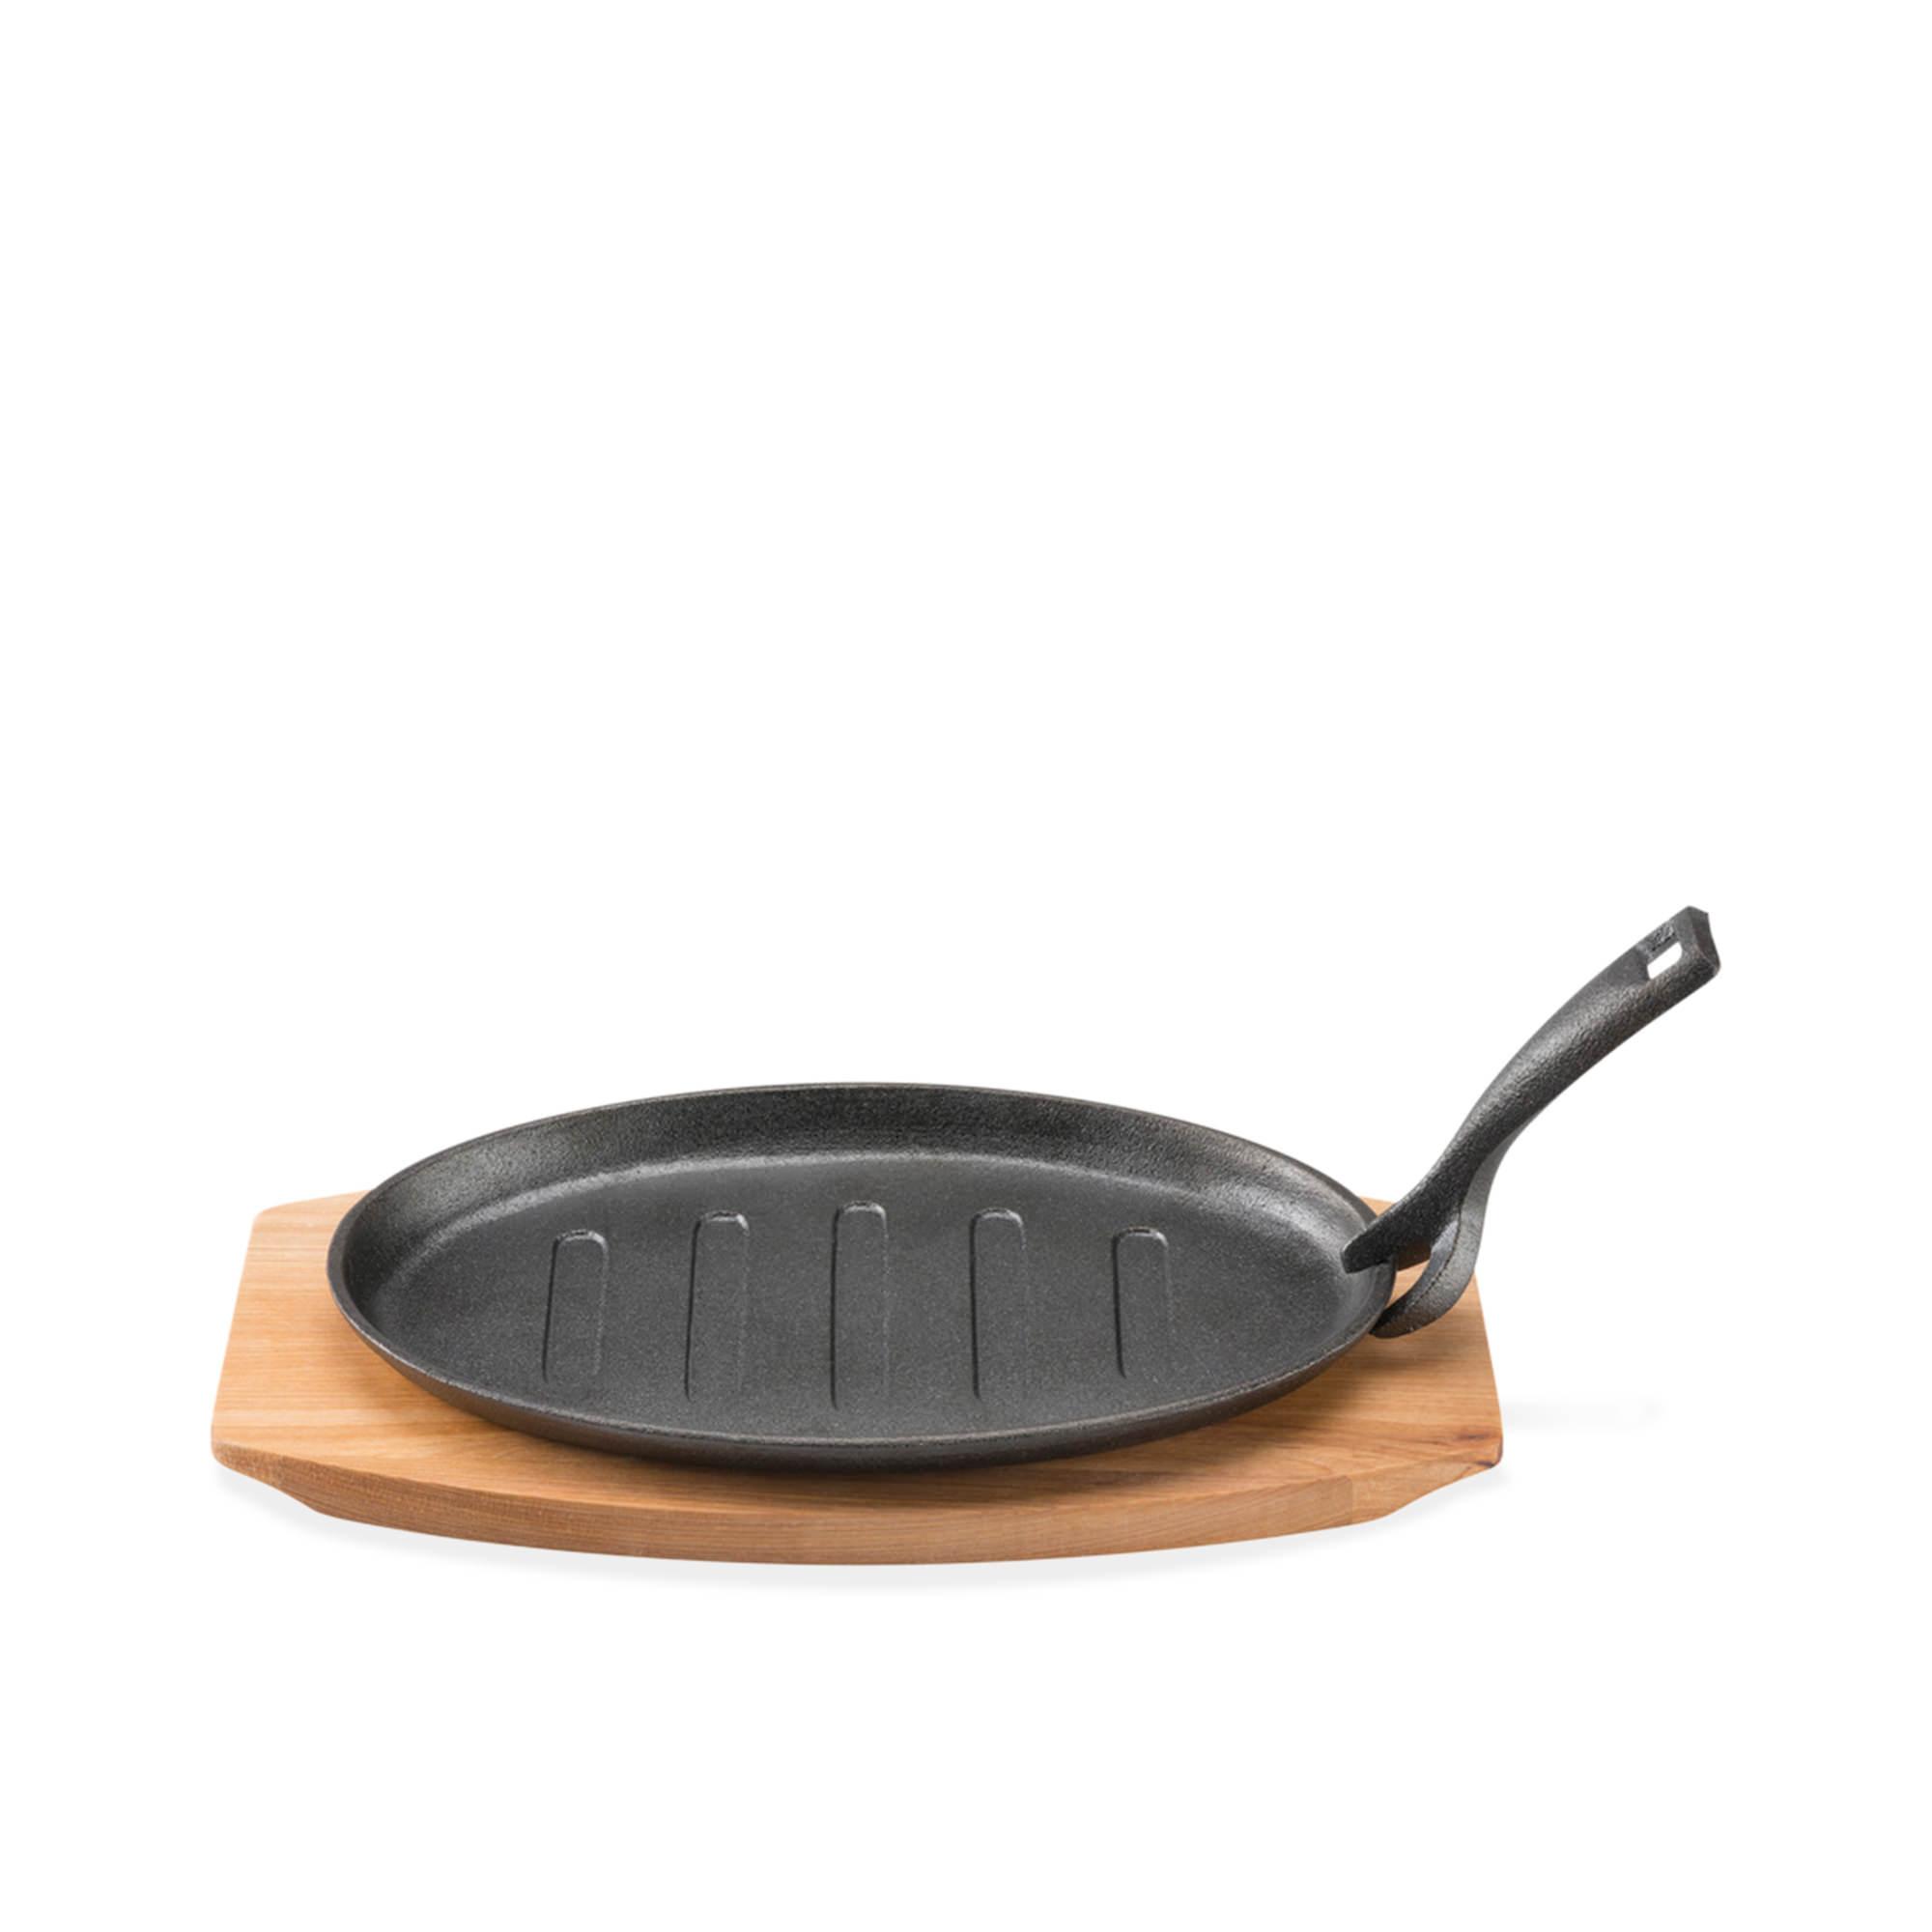 Pyrolux Pyrocast Cast Iron Oval Sizzle Plate with Maple Tray 27x18cm Image 1